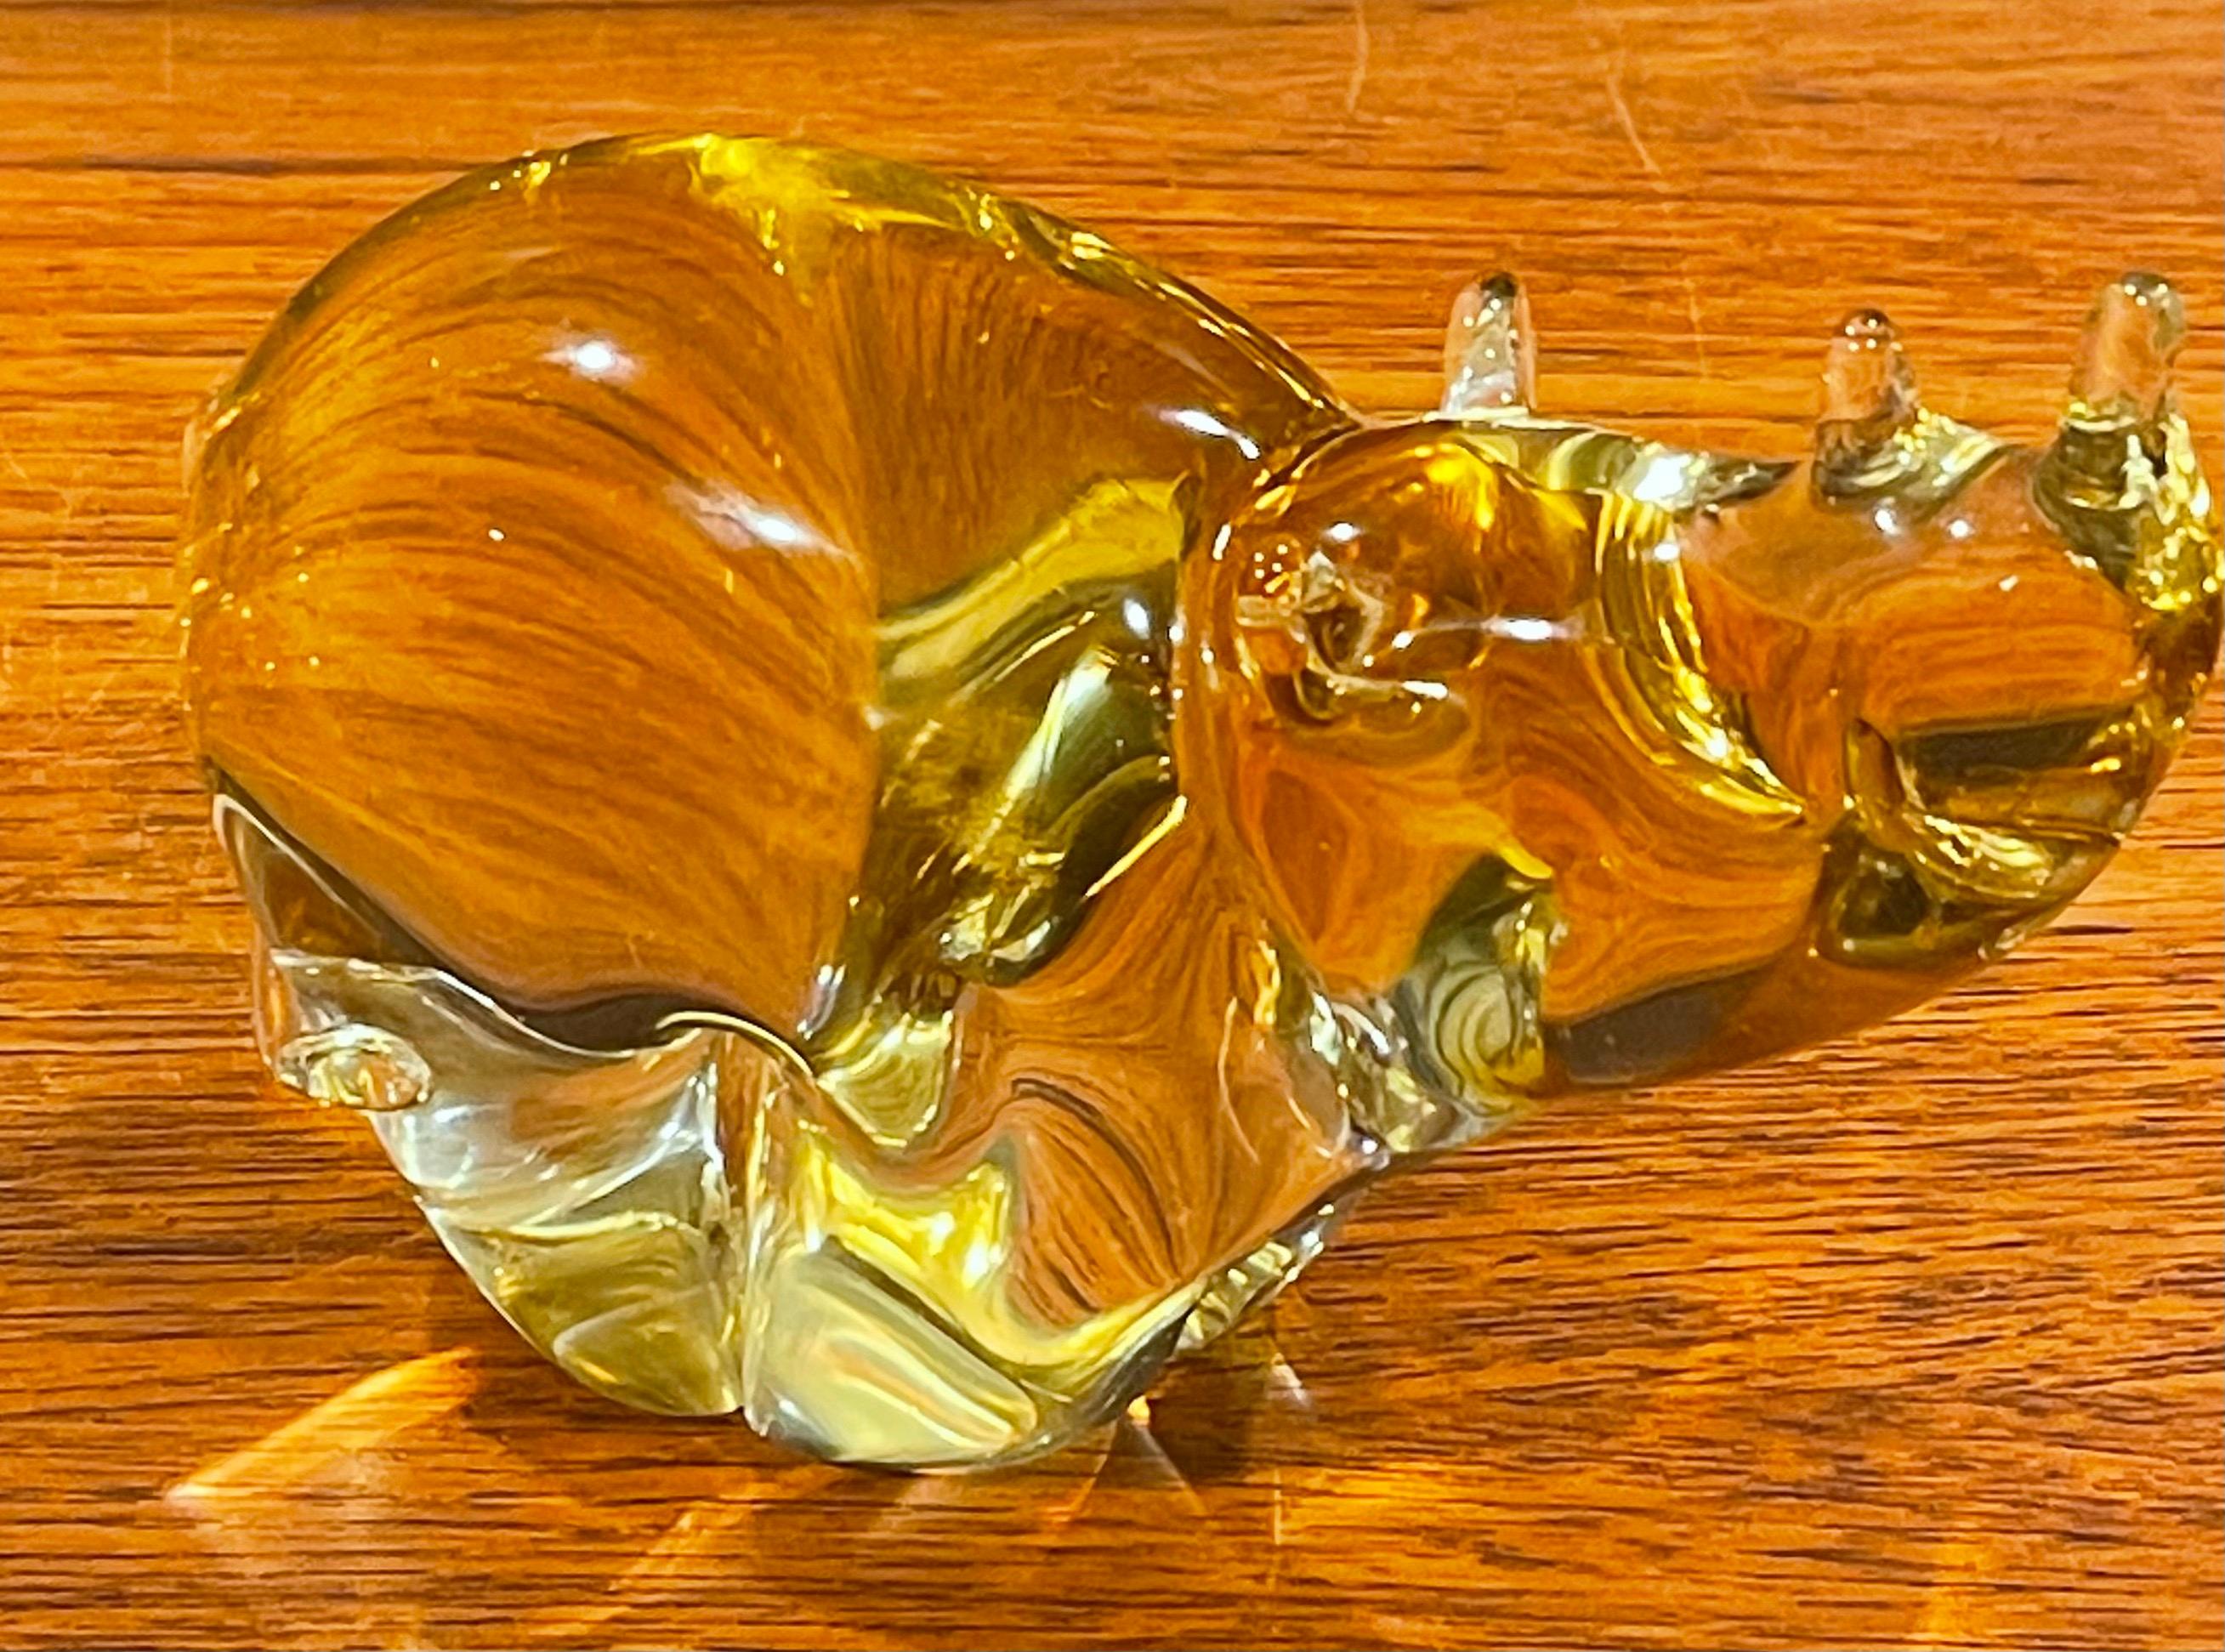 Beautiful art glass rhino / rhinoceros sculpture by Murano, circa 1980s. The sculpture has a light gold finish and is in very good condition; it measures 6.5